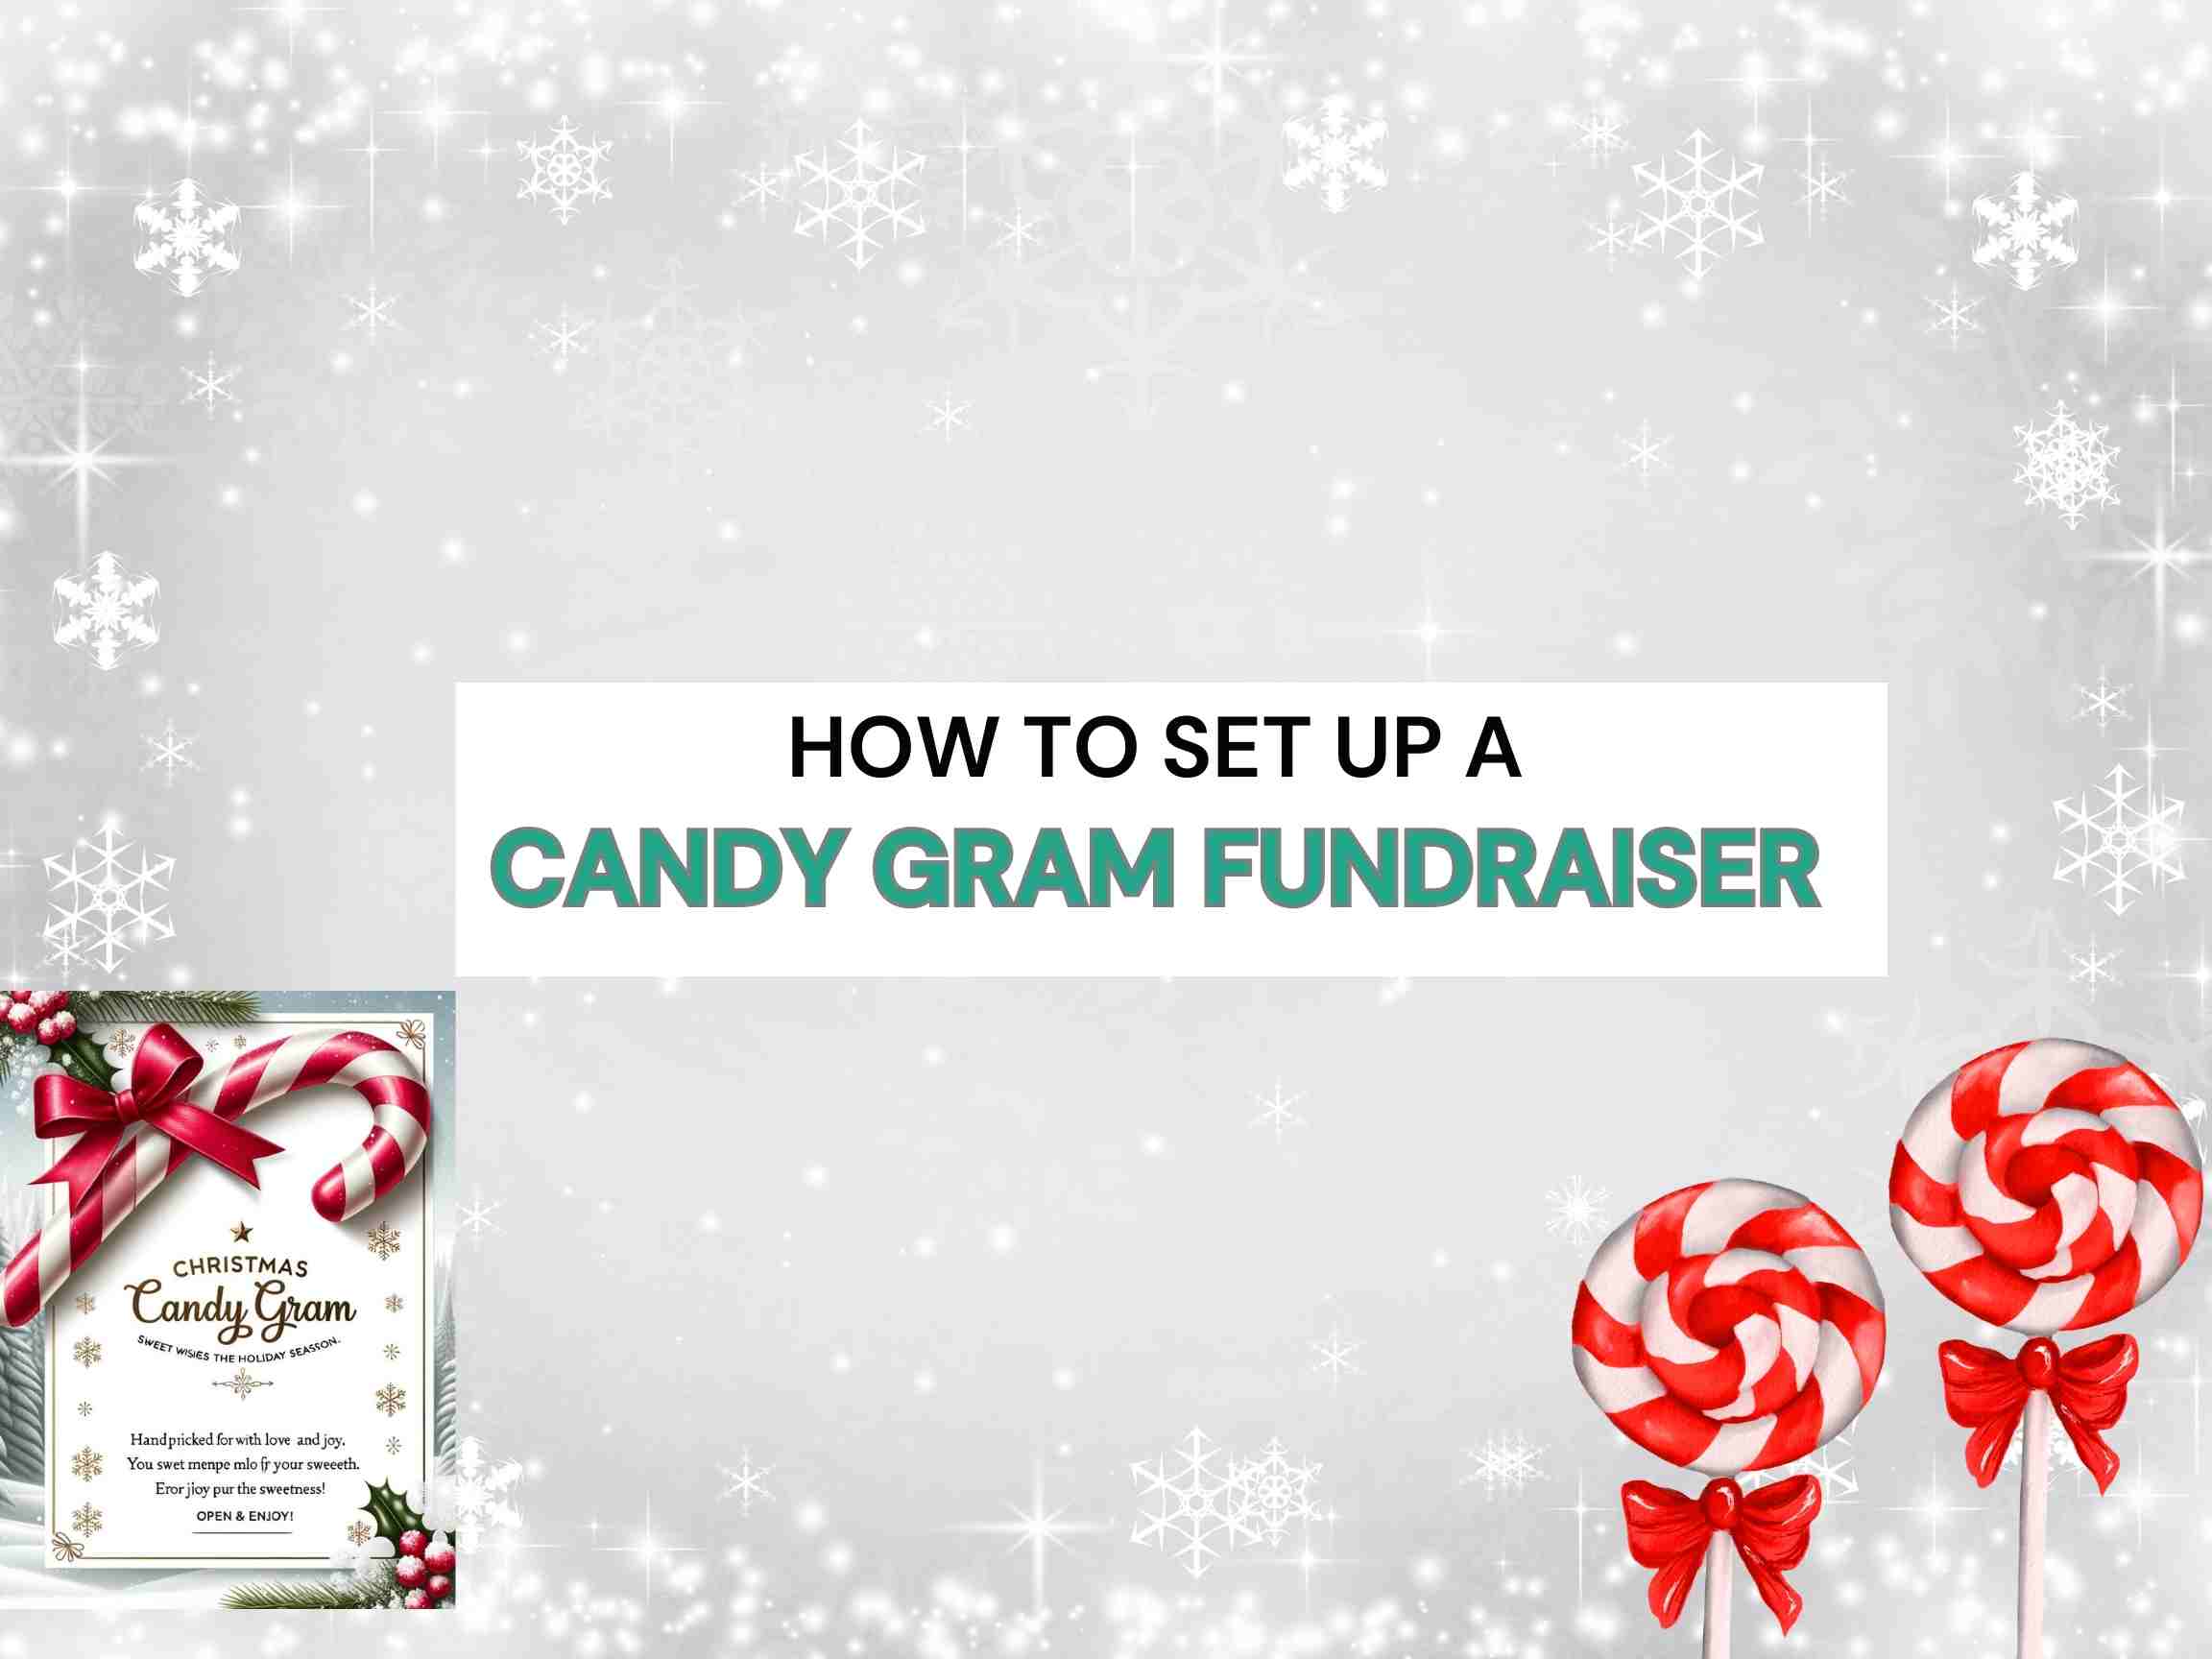 How to set up a candy gram fundraiser